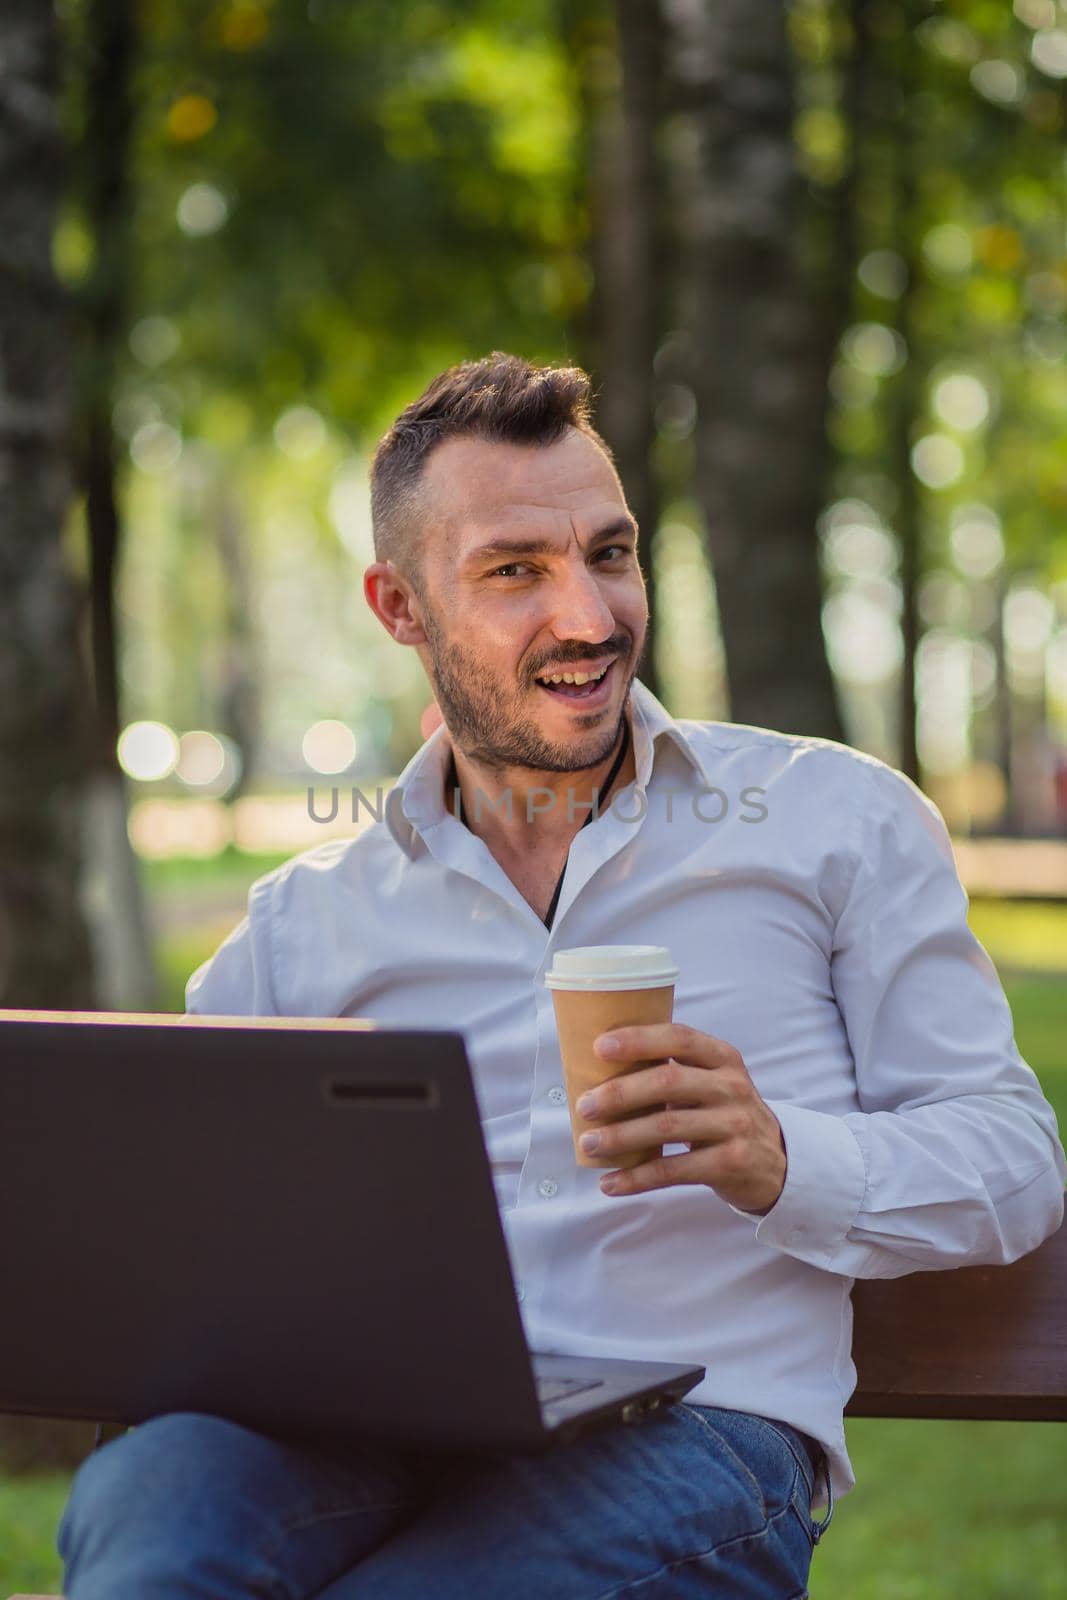 Laughing businessman is working in the park with a laptop, drinking coffee. A young man on a background of green trees, a hot sunny summer day. Warm soft light, close-up.